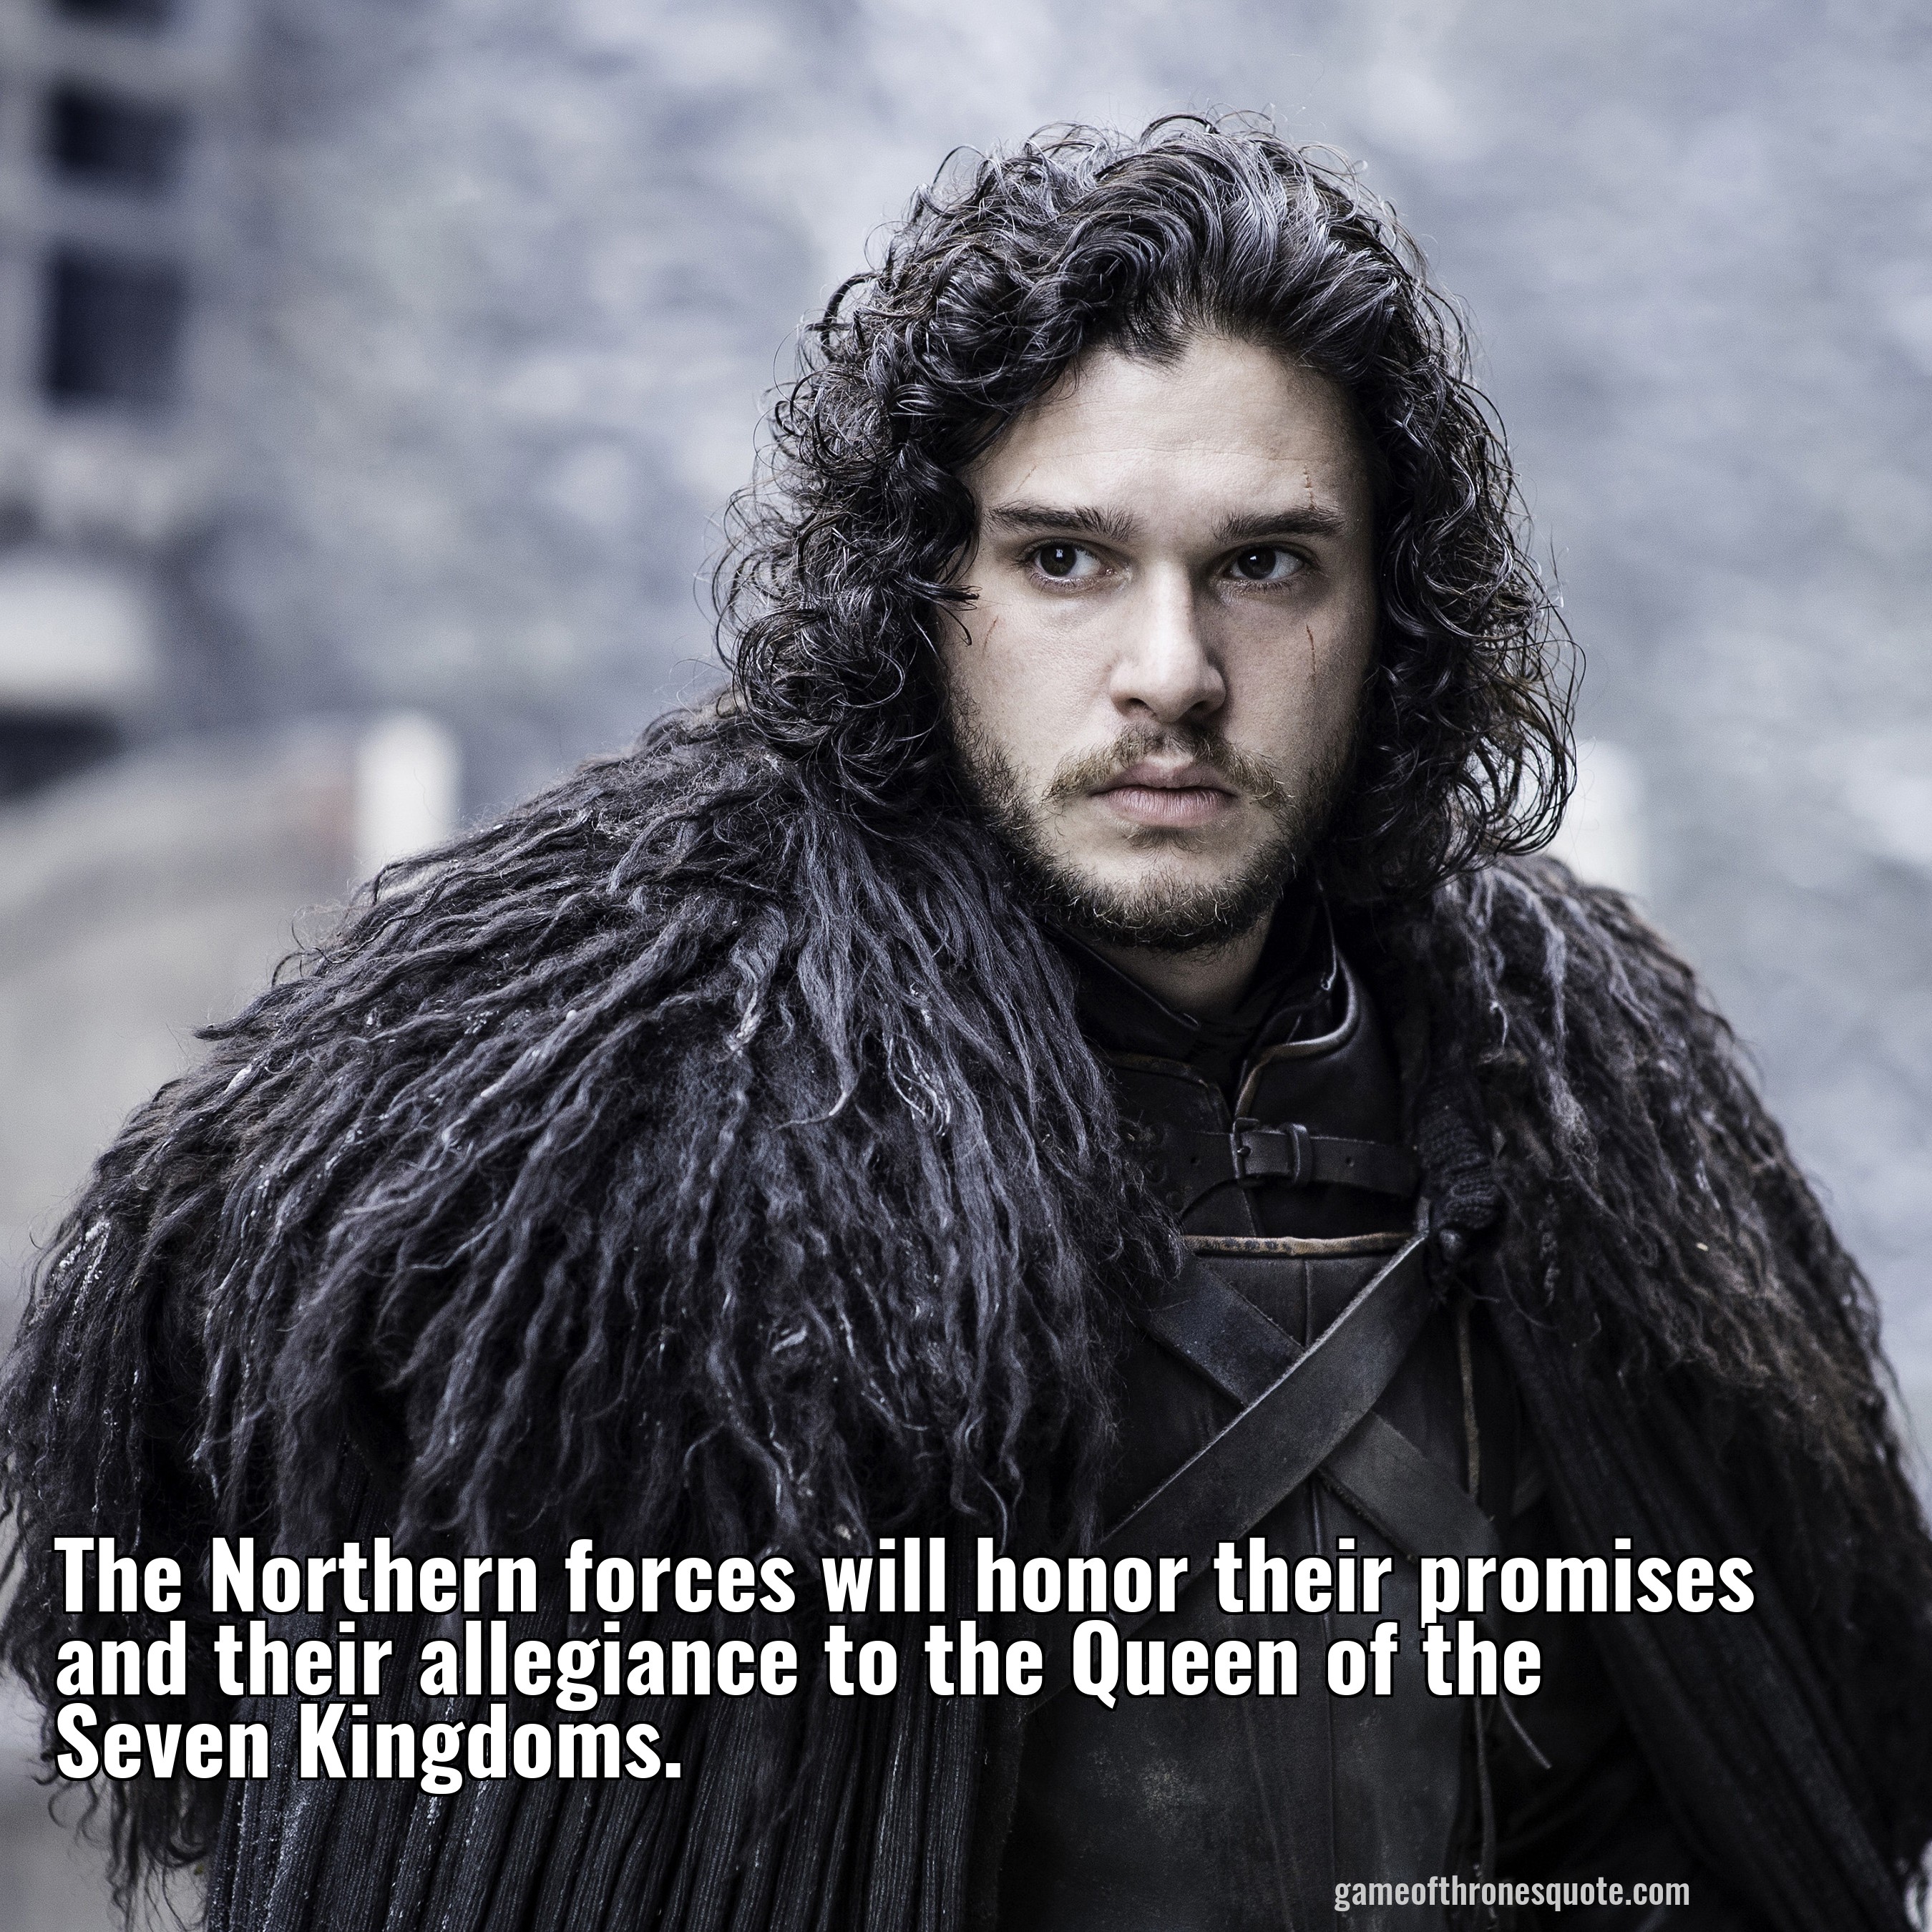 The Northern forces will honor their promises and their allegiance to the Queen of the Seven Kingdoms.